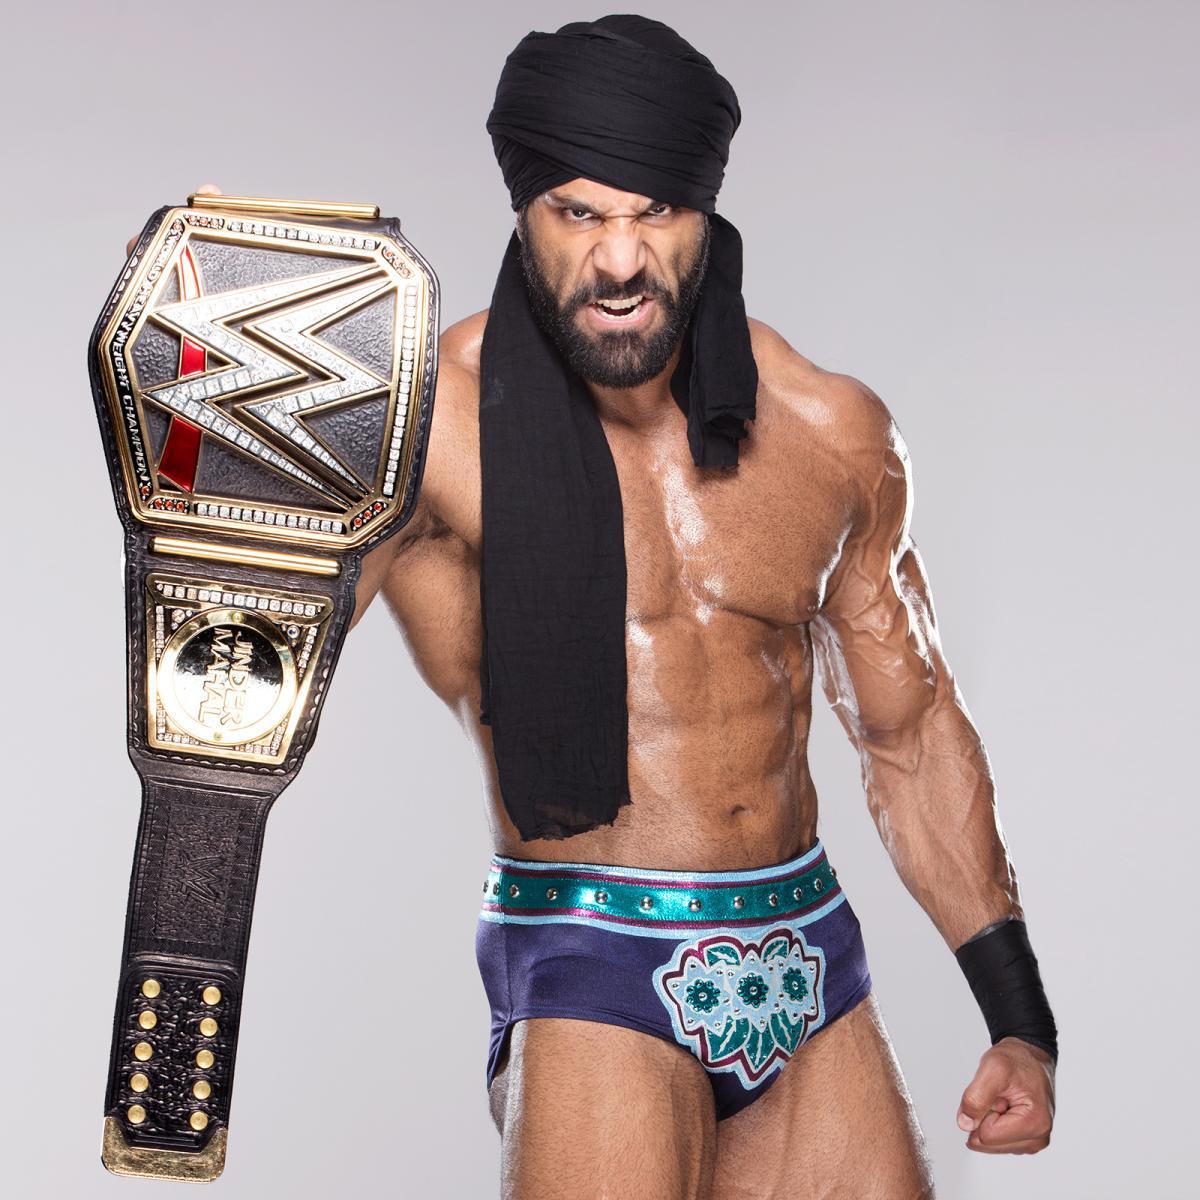 Jinder Mahal's first picture as WWE Champion: photo